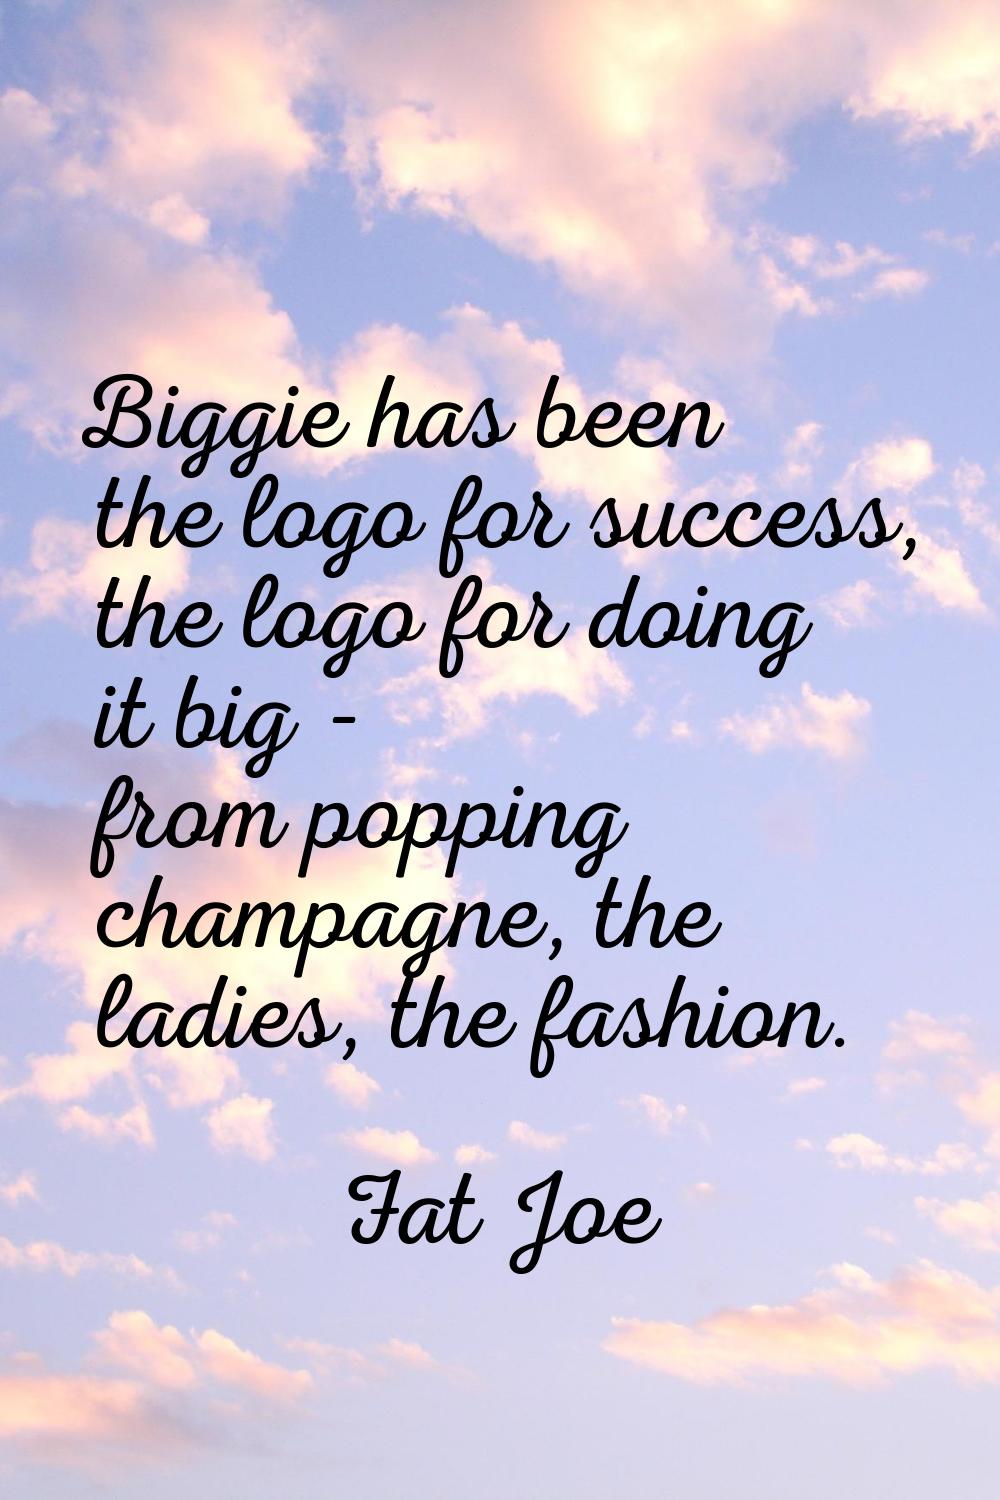 Biggie has been the logo for success, the logo for doing it big - from popping champagne, the ladie